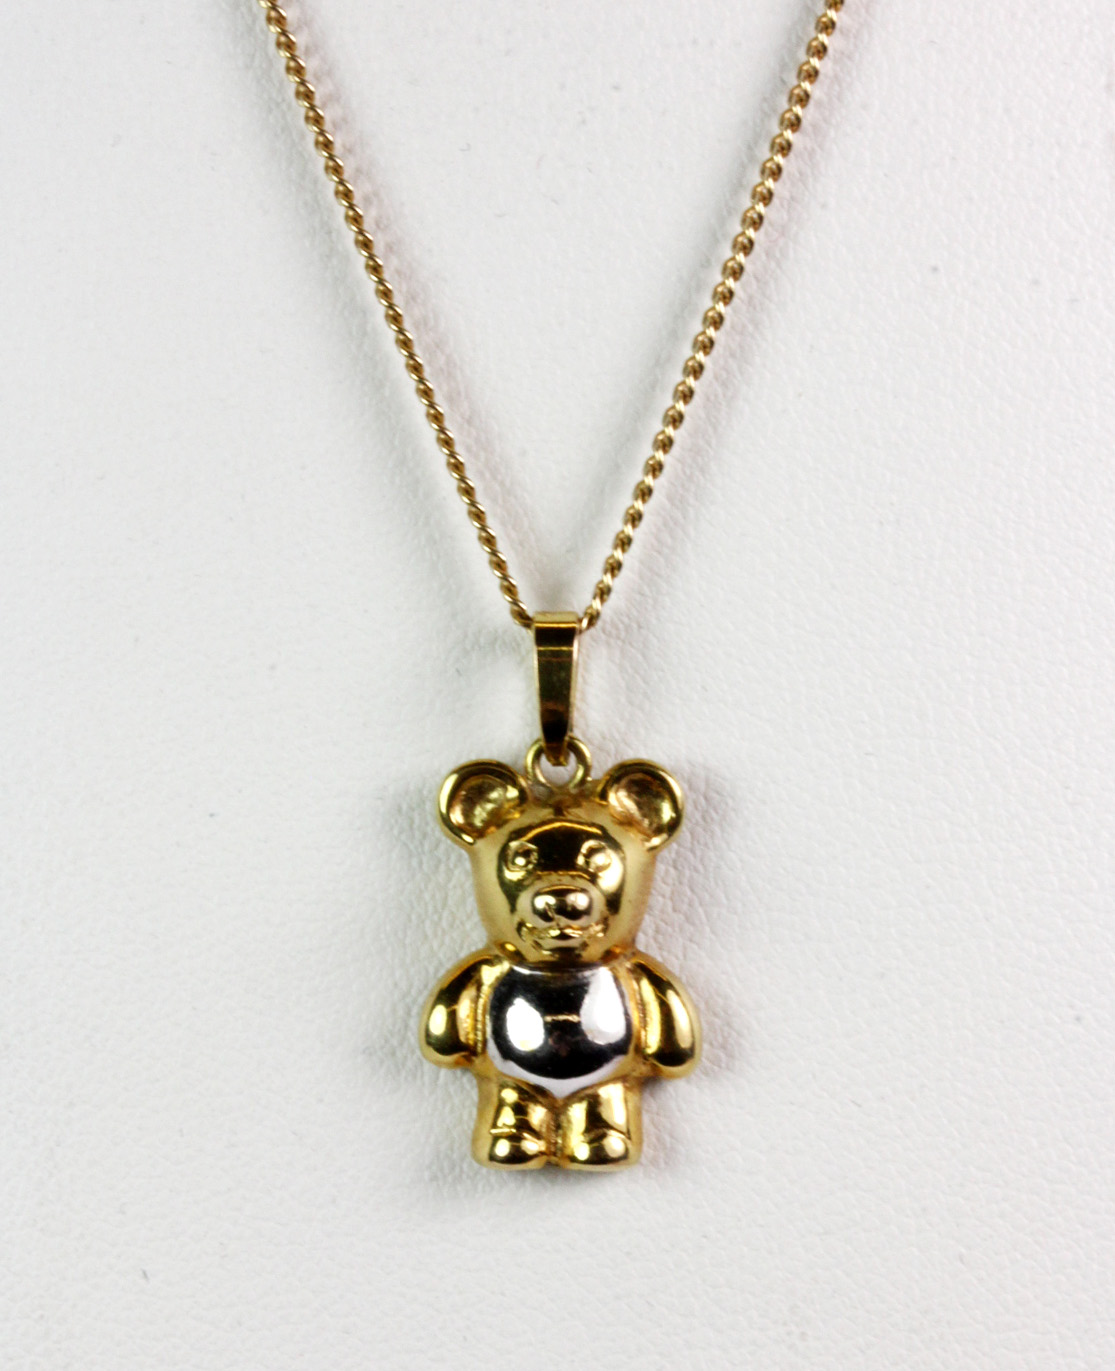 A 9ct yellow and white gold bear pendant and chain (approx. 3.7gr).